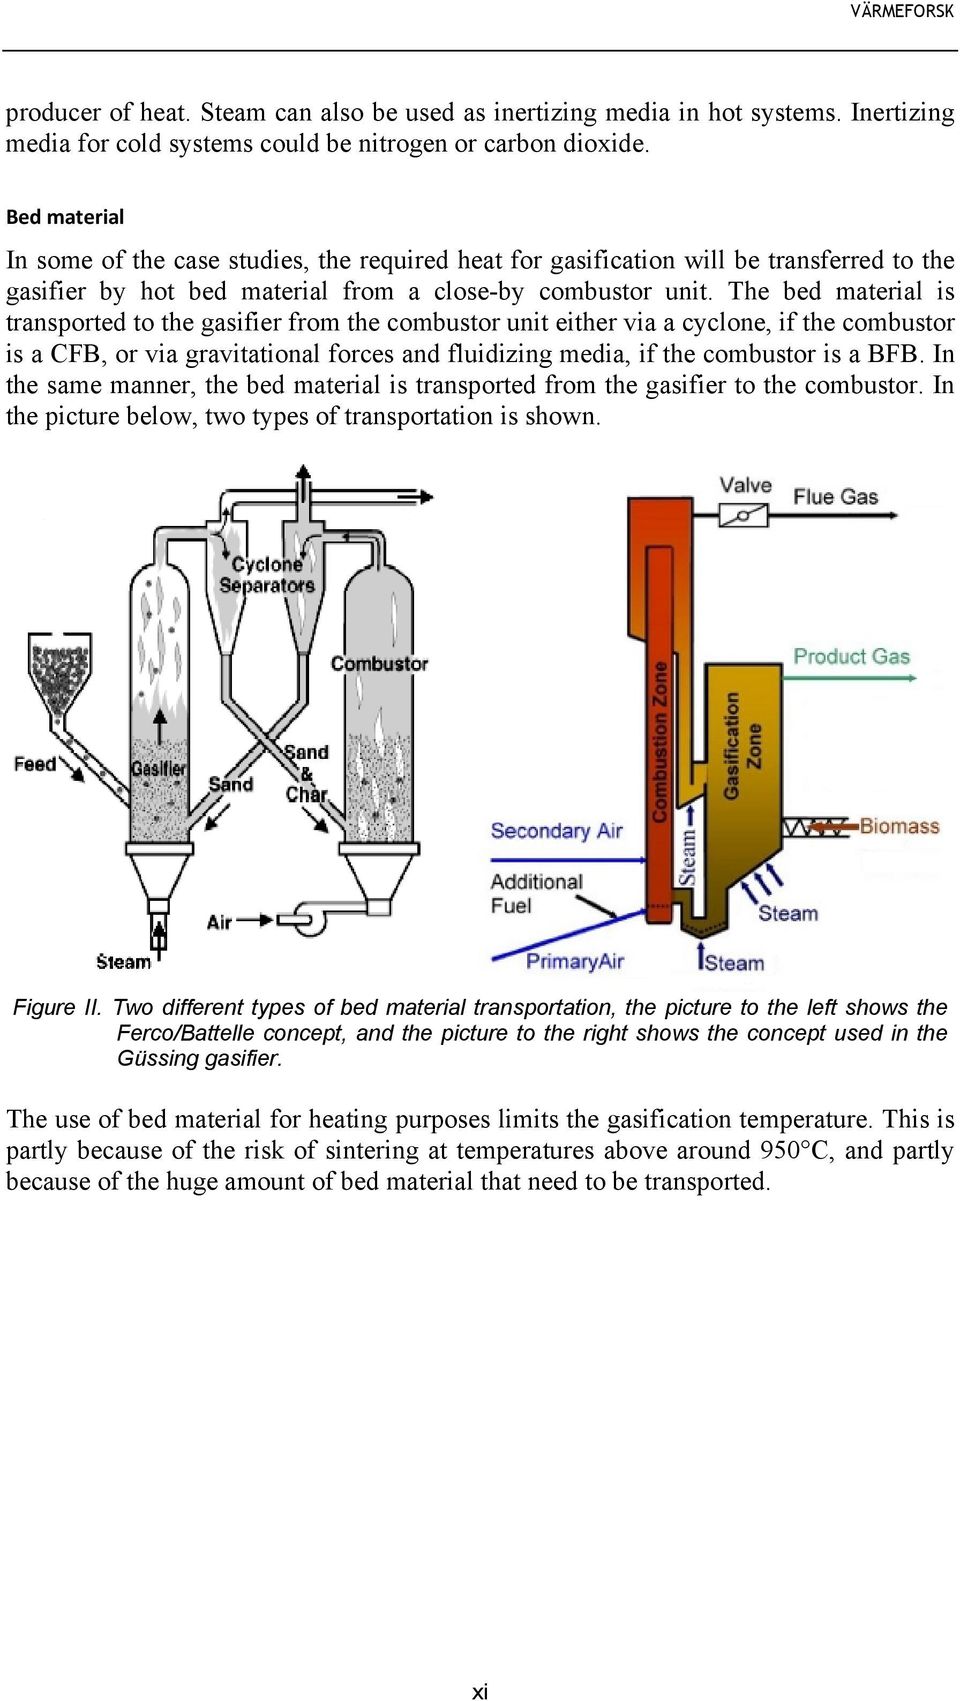 The bed material is transported to the gasifier from the combustor unit either via a cyclone, if the combustor is a CFB, or via gravitational forces and fluidizing media, if the combustor is a BFB.